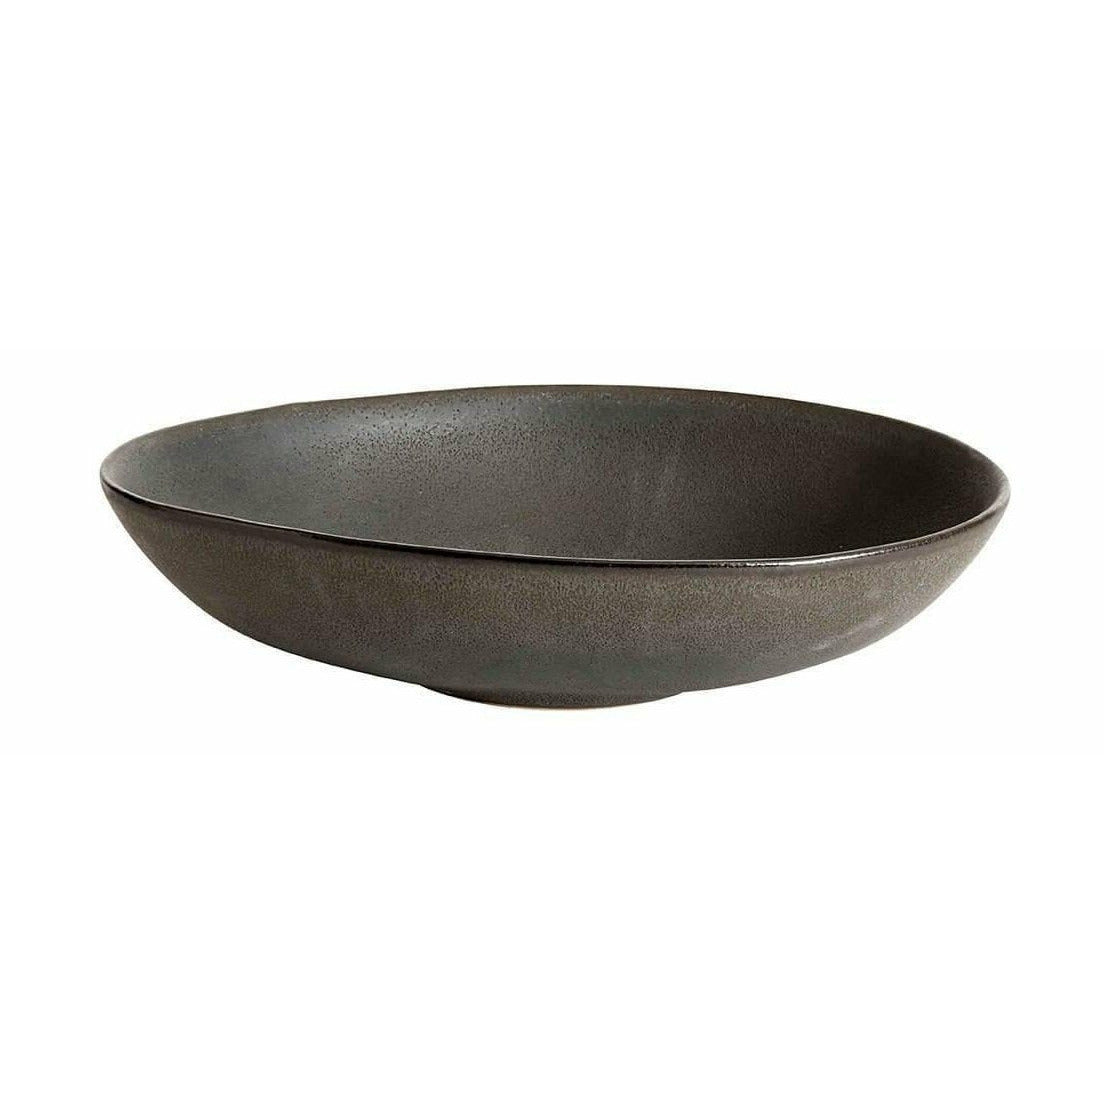 Muubs Mame Serviing Bowl Coffee, 19cm